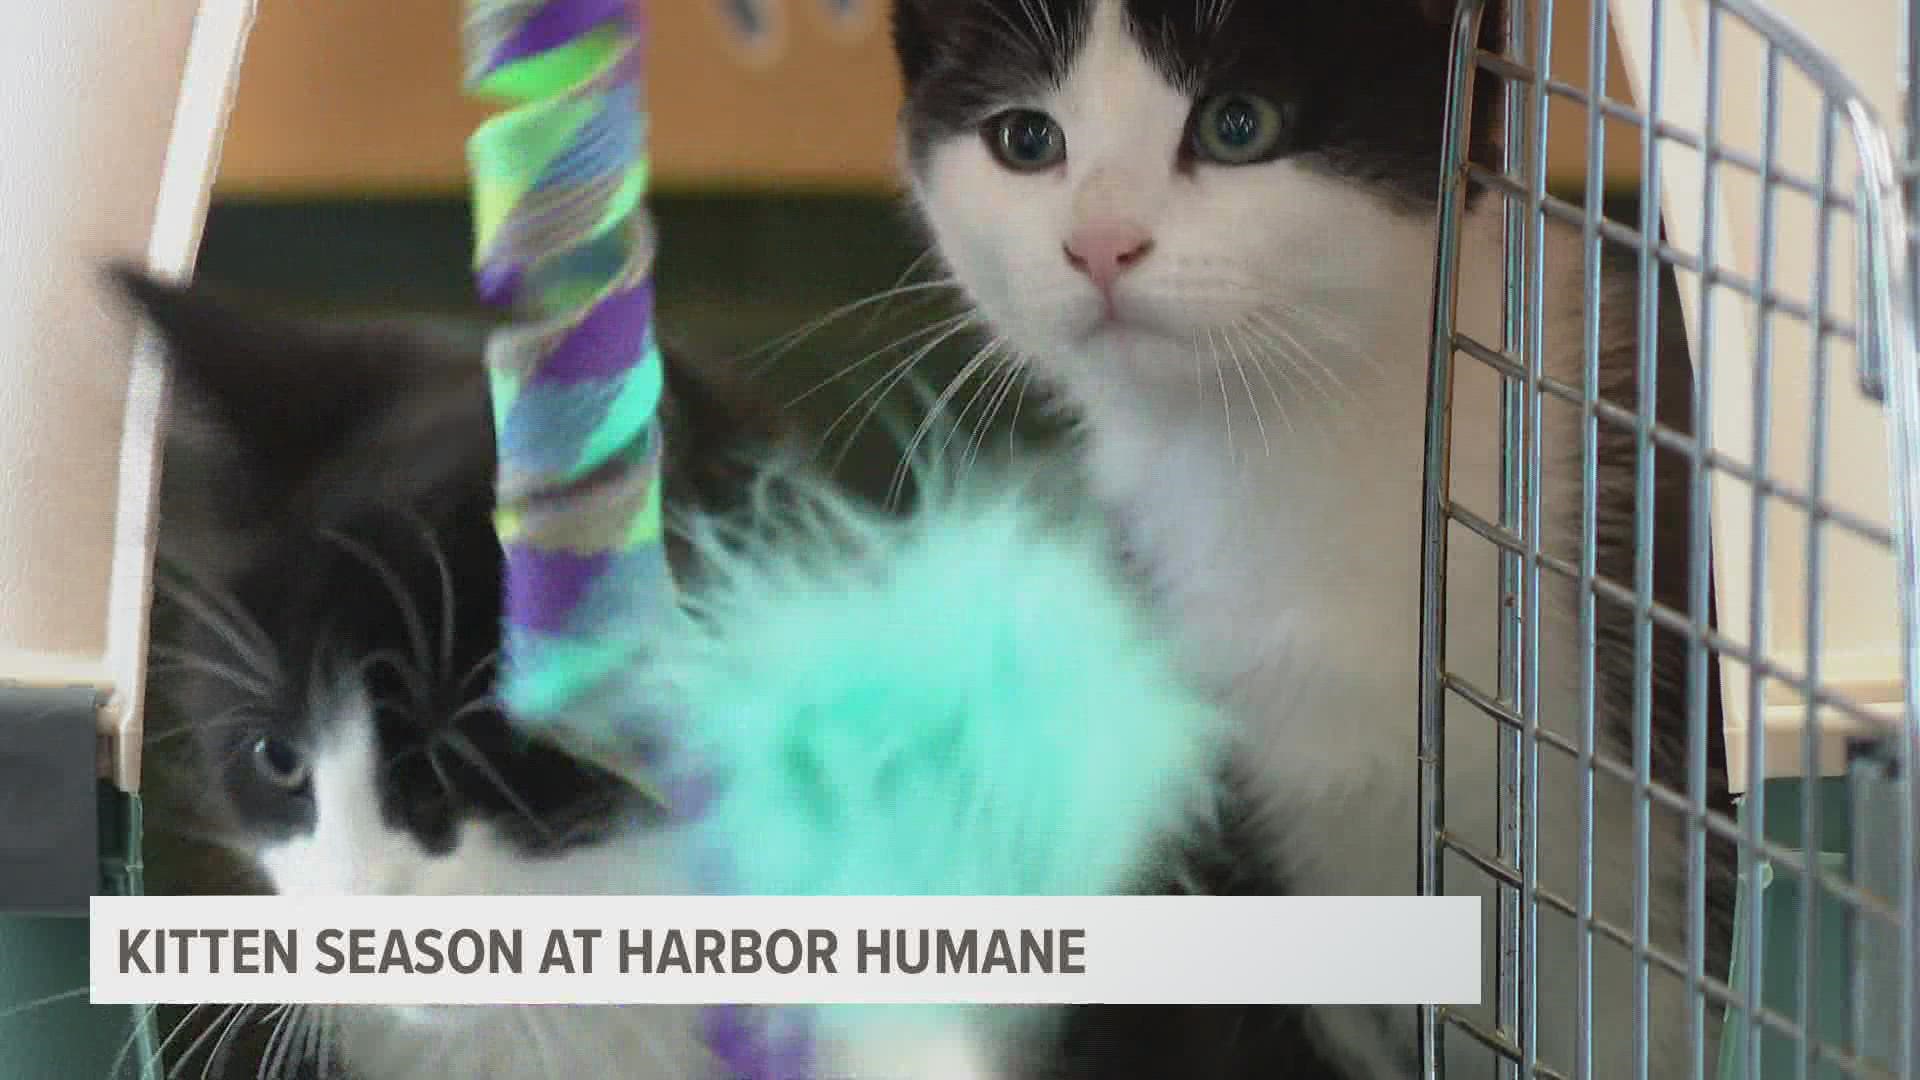 On a cold and rainy Tuesday, Harbor Humane took in 19 stray cats, including eight kittens without a mom.